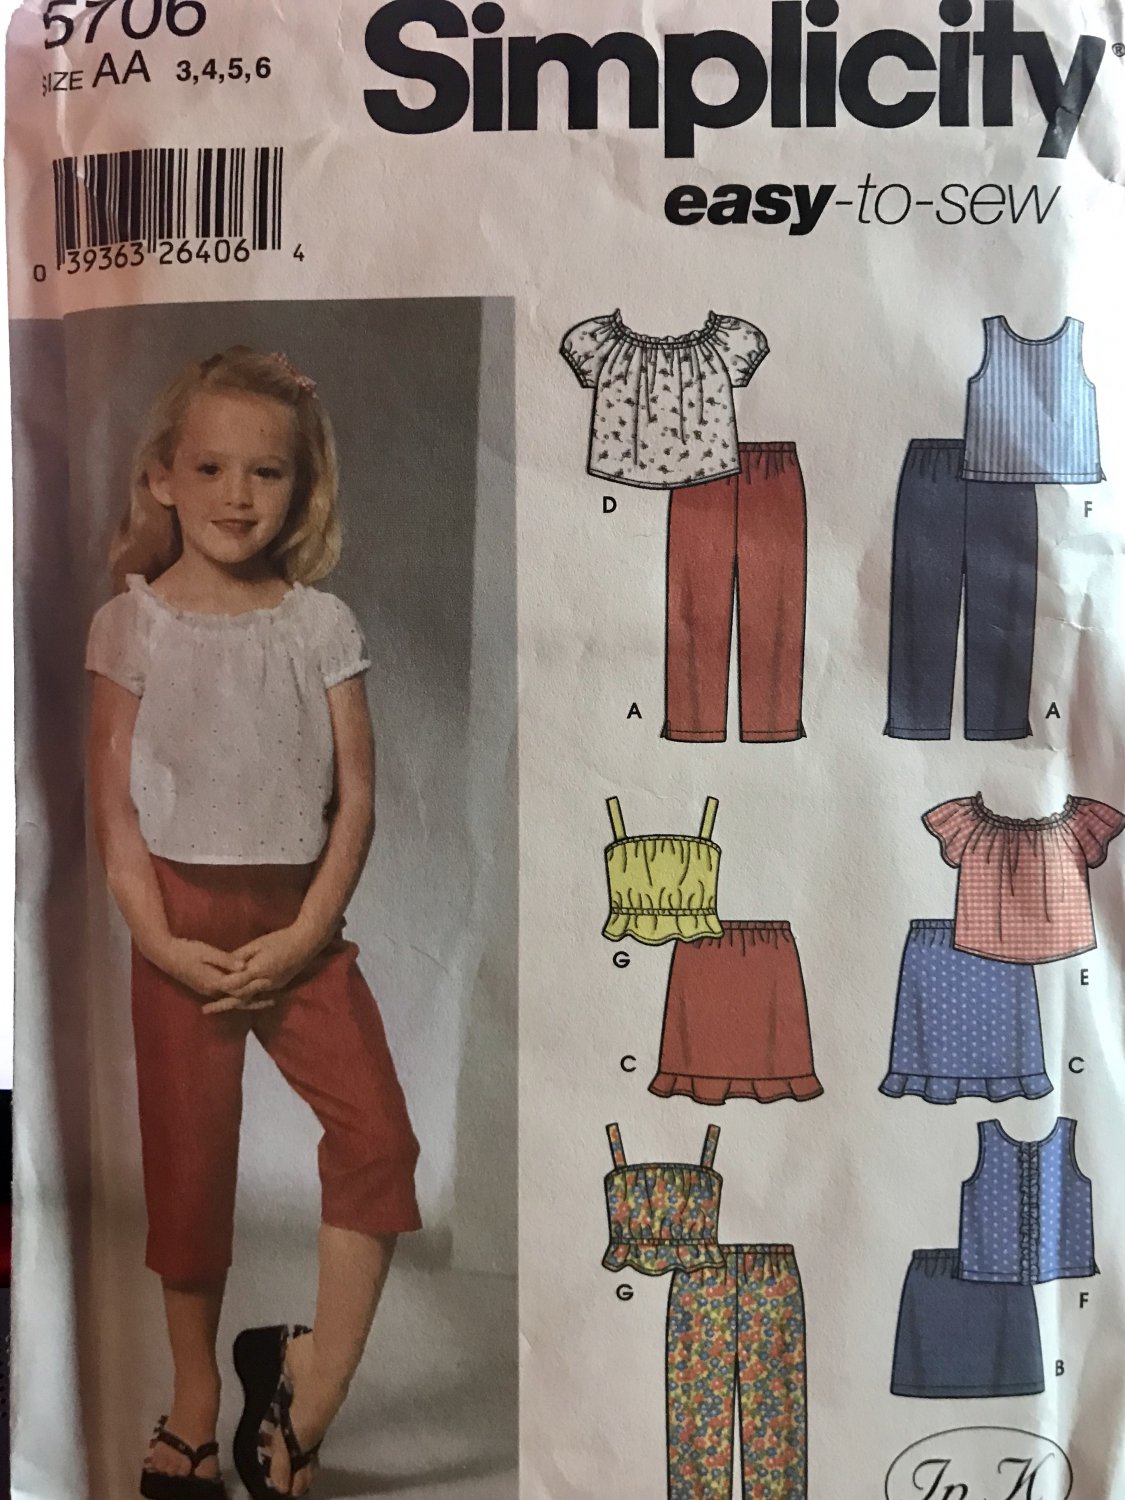 Simplicity 5706 Child's Capri pants, skirt in two lengths and tops Sewing Pattern Size 3 4 5 6